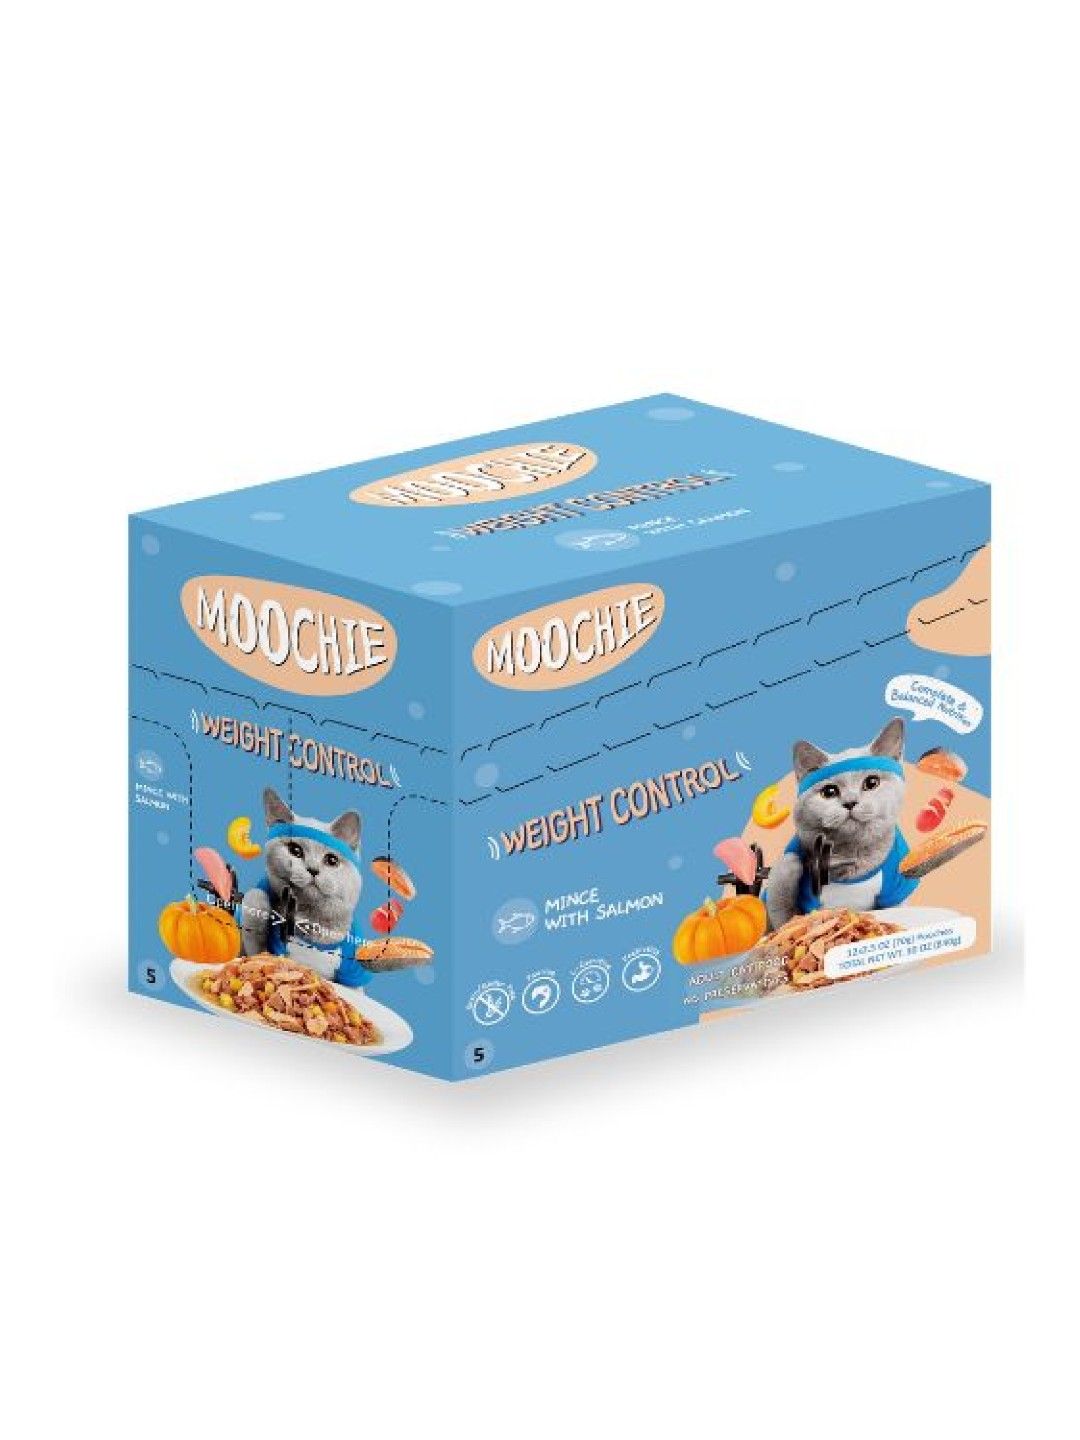 Moochie Cat Food Mince with Salmon Weight Control 70g (12pcs)